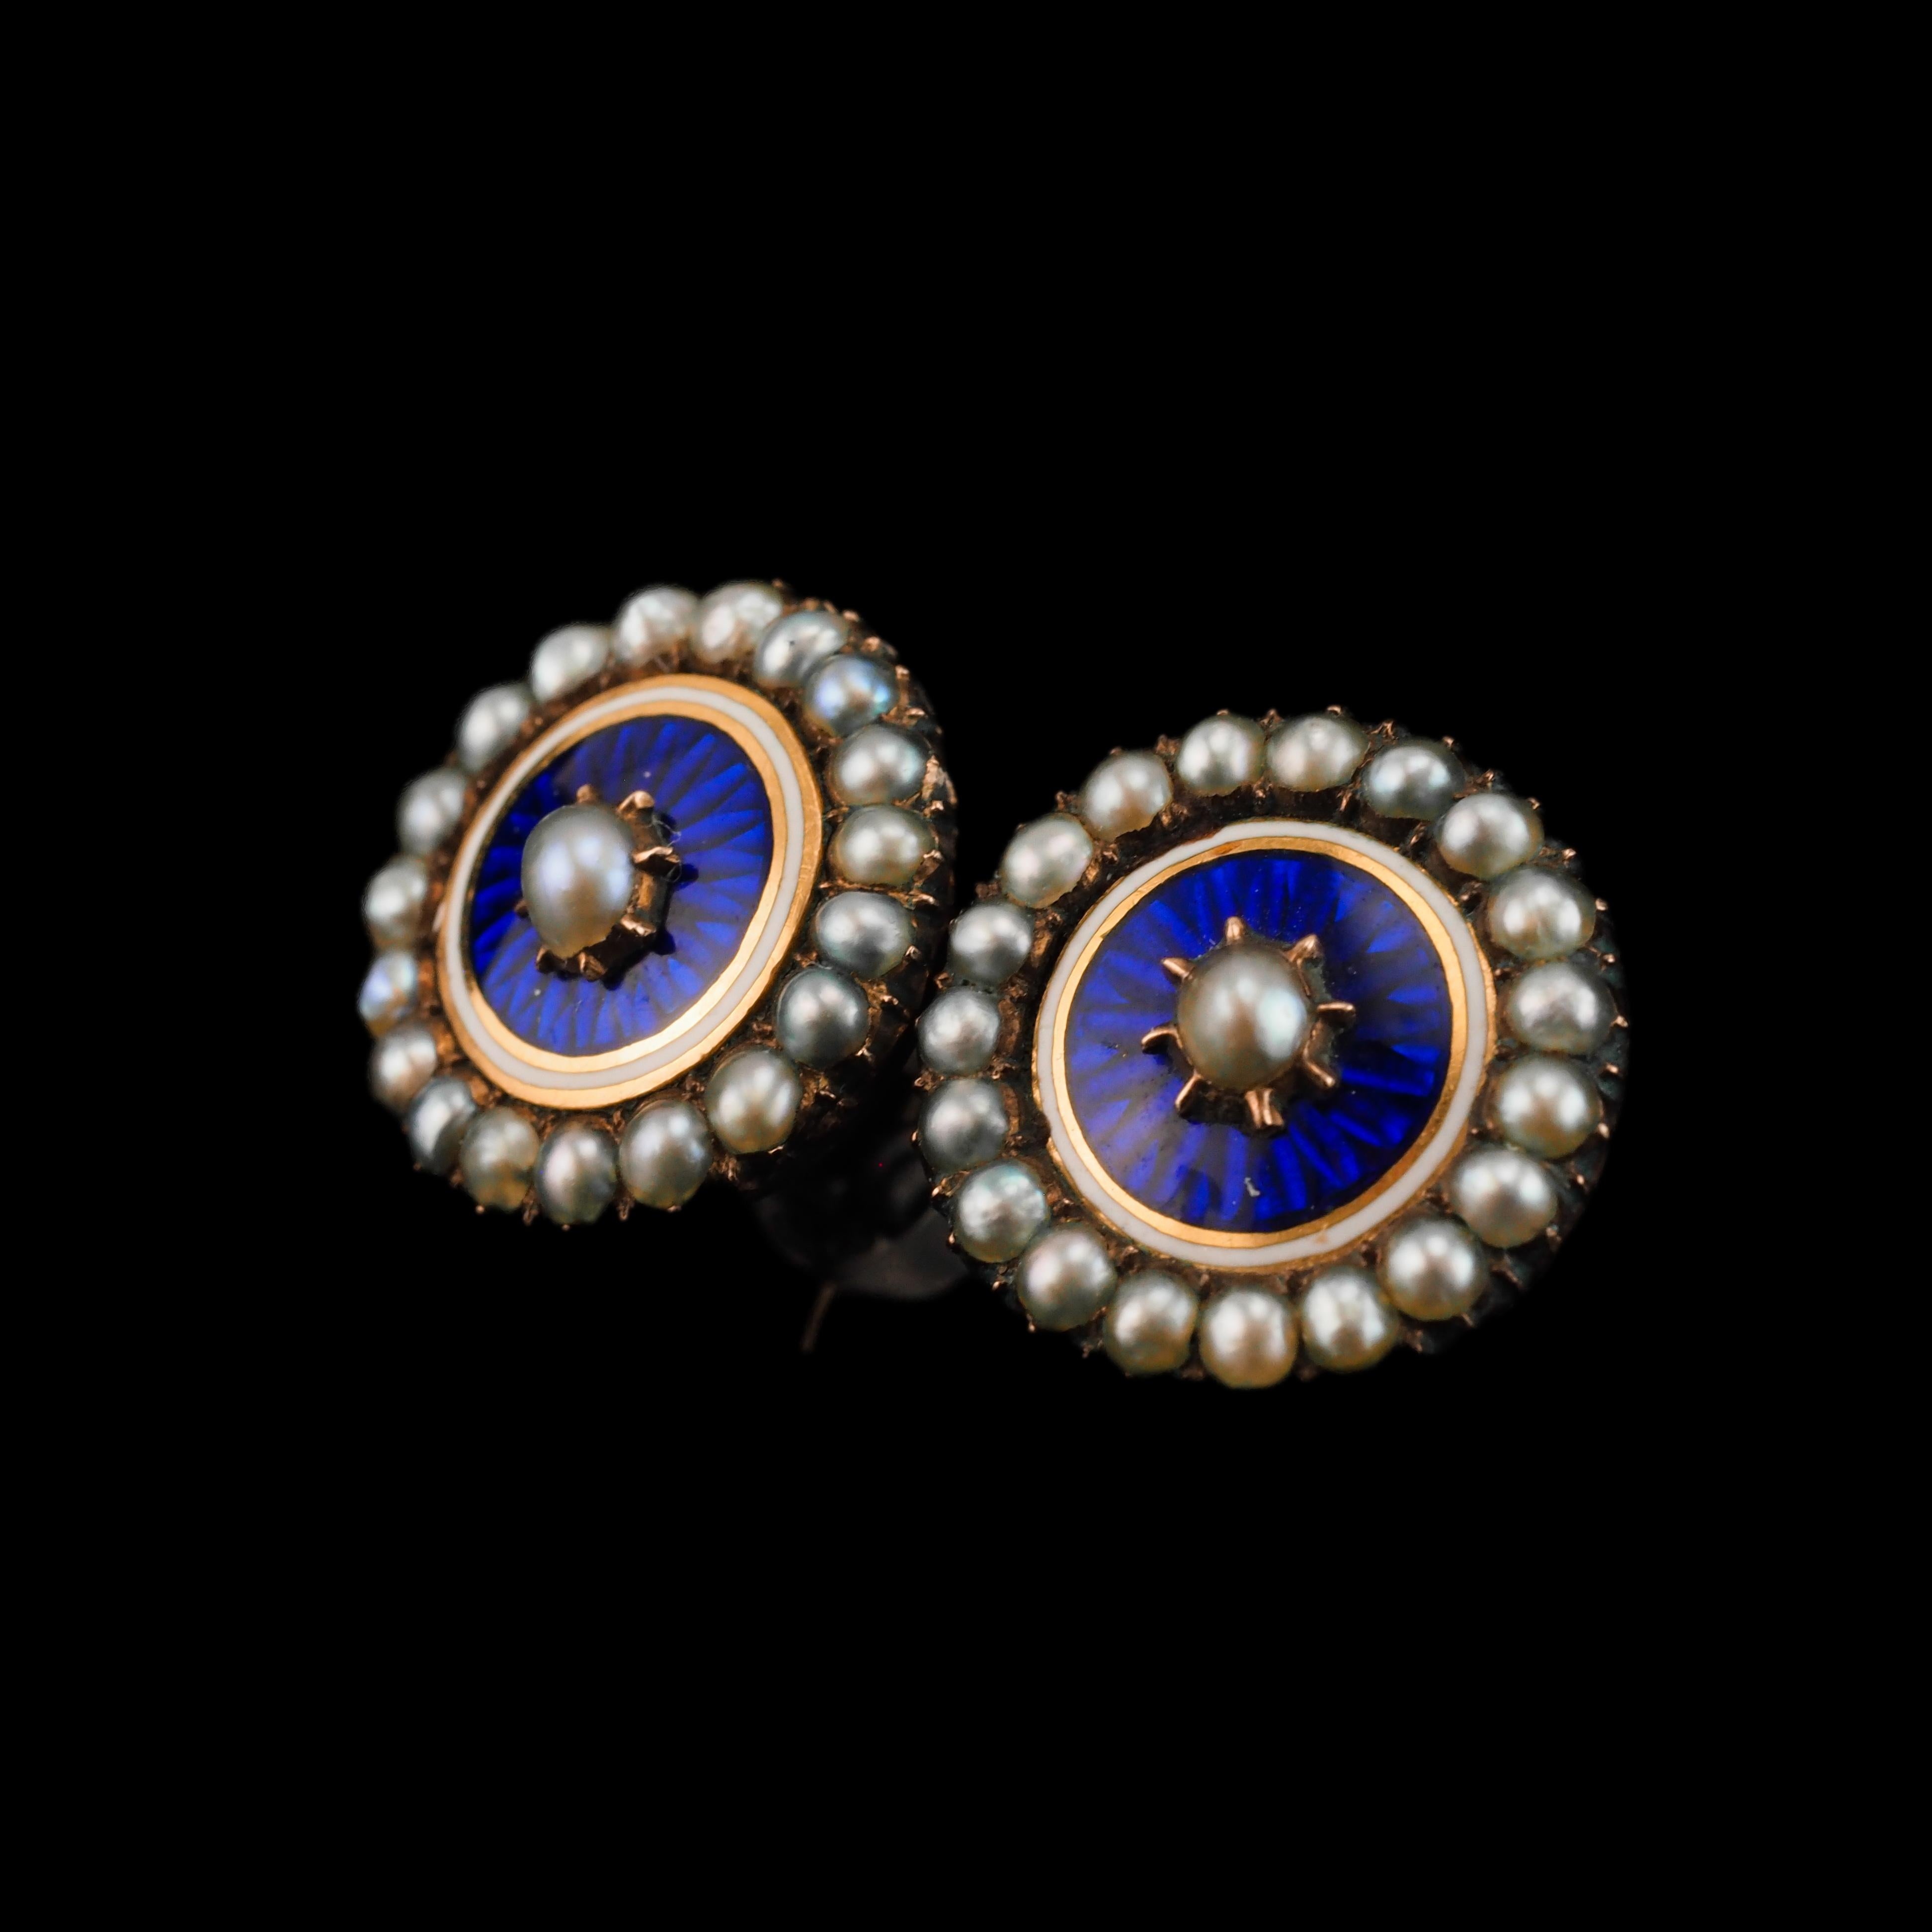 Antique Georgian Gold Earrings with Blue Enamel Guilloche Pearl Cluster c.1800 For Sale 4